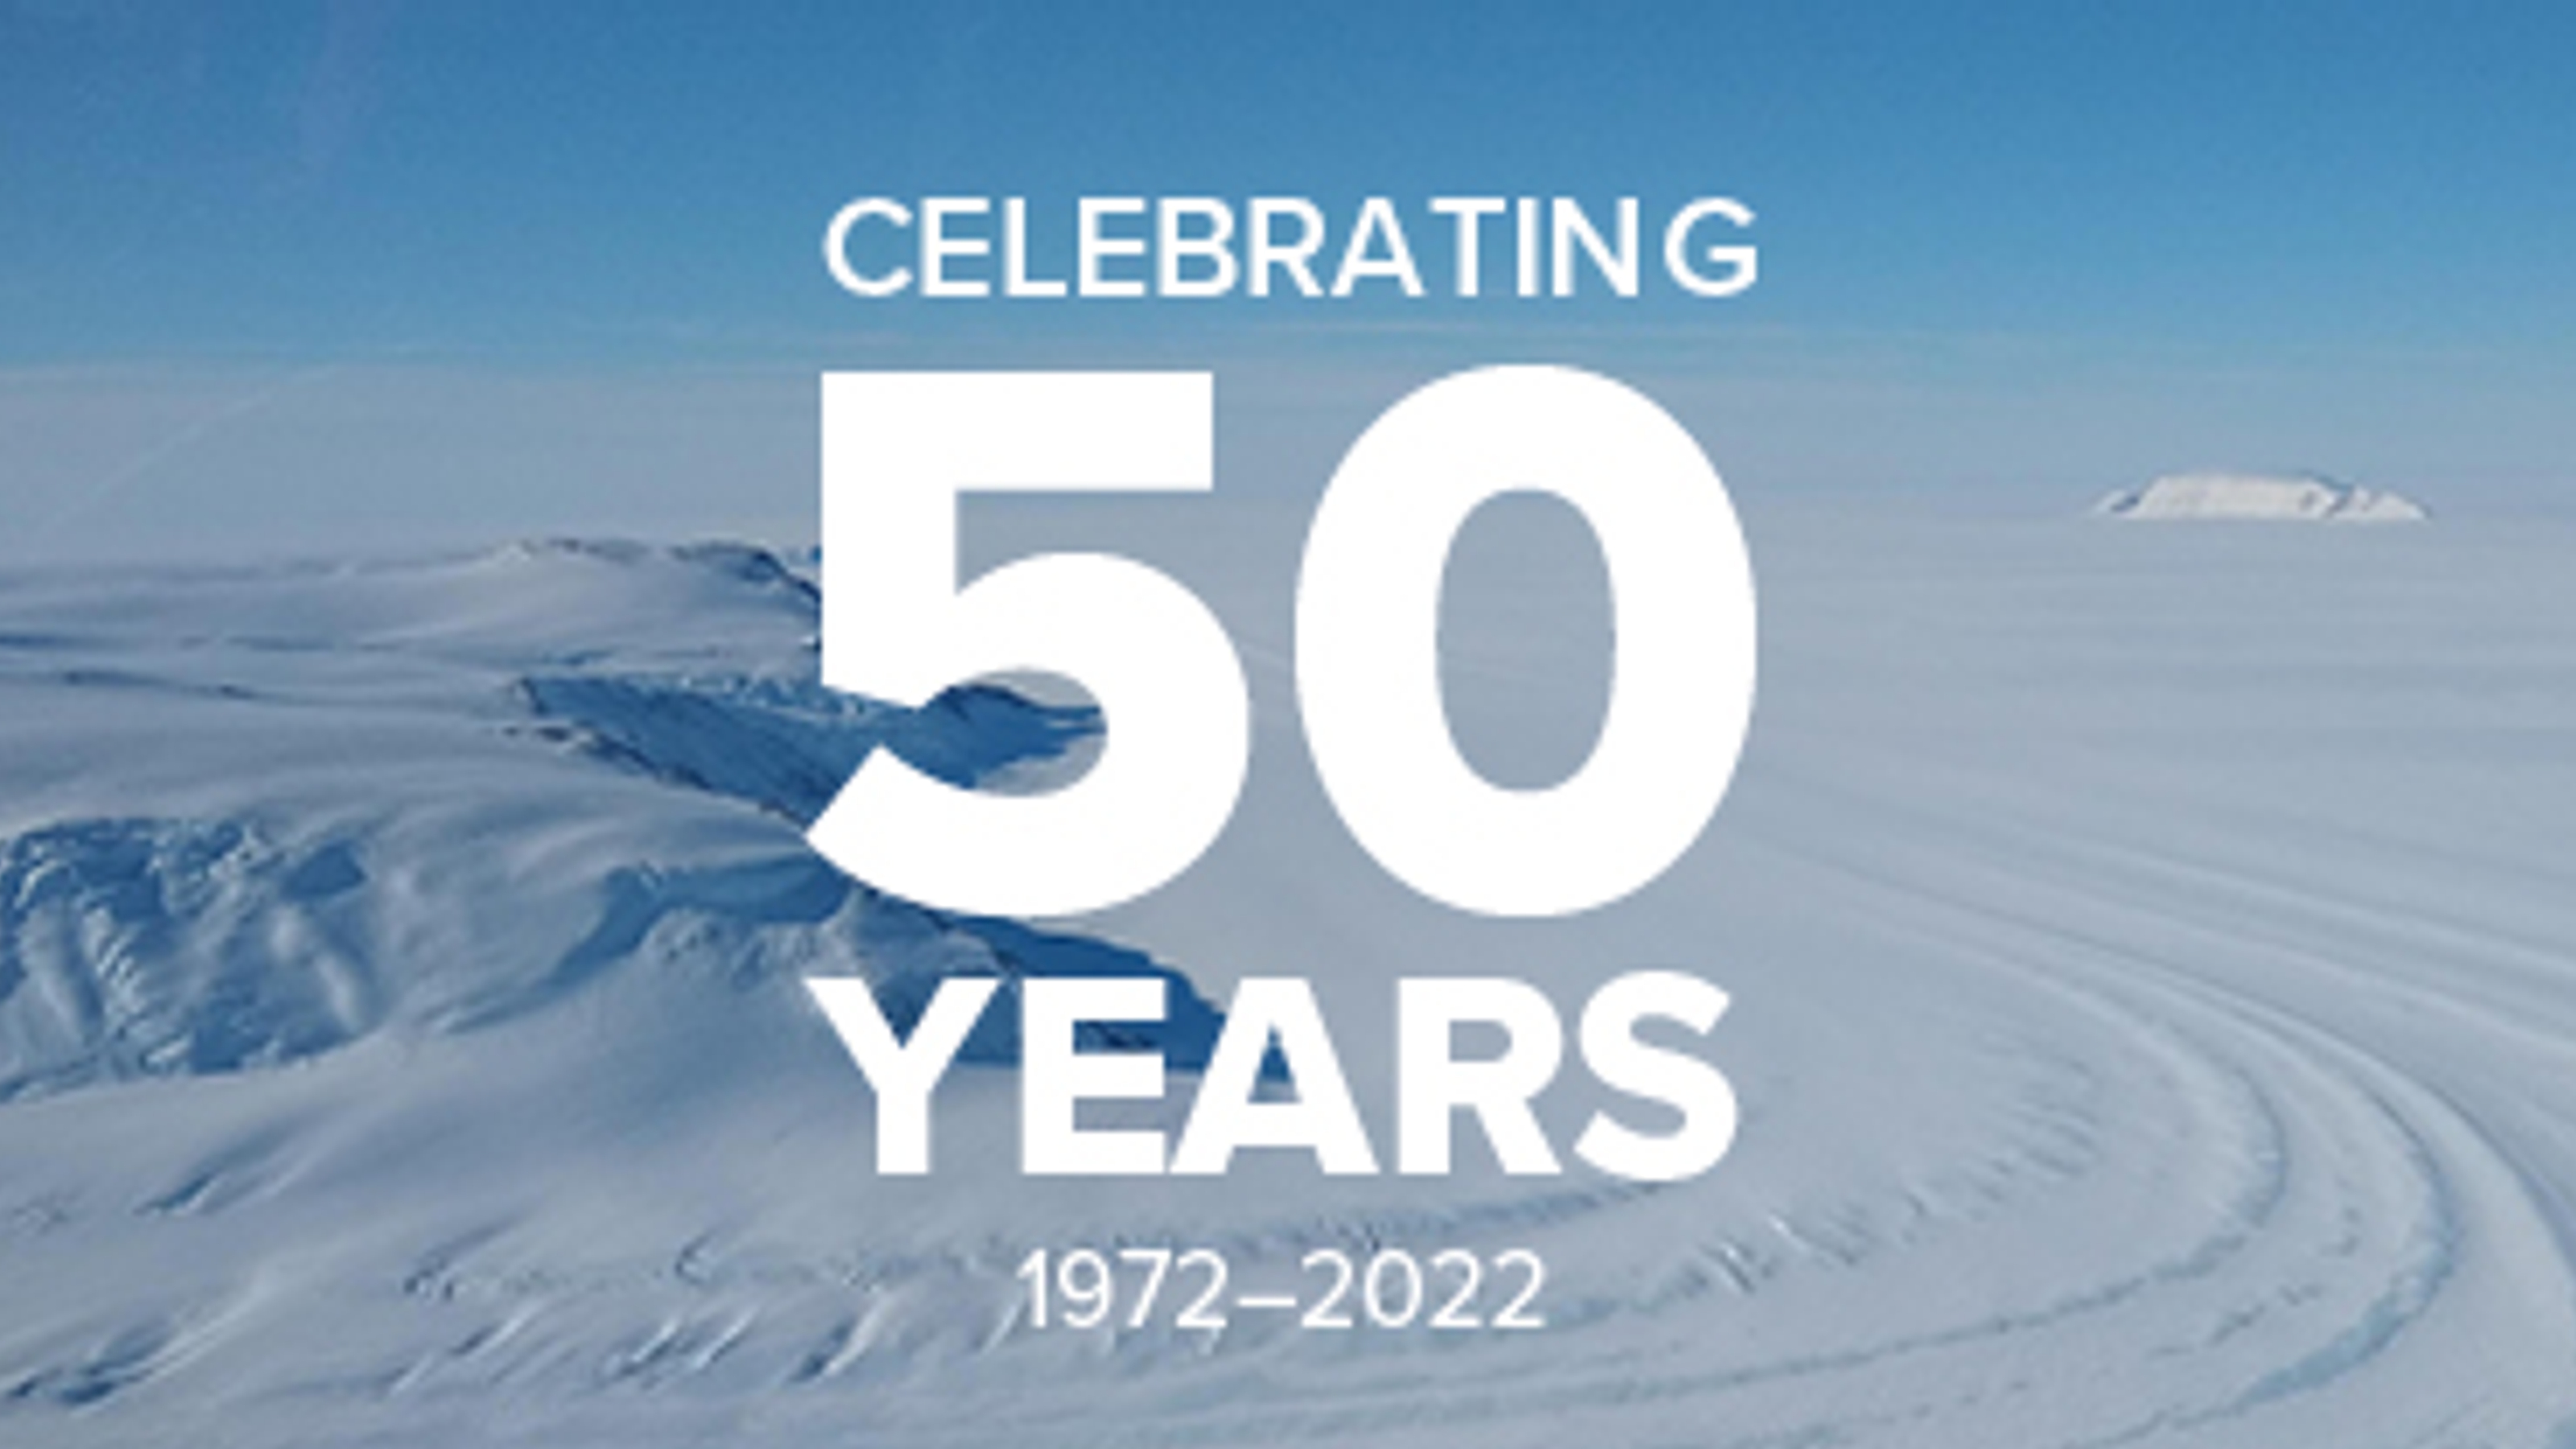 Snow covered Antarctic landscape with text overlay that says 'Celebrating 50 years, 1972-2022'